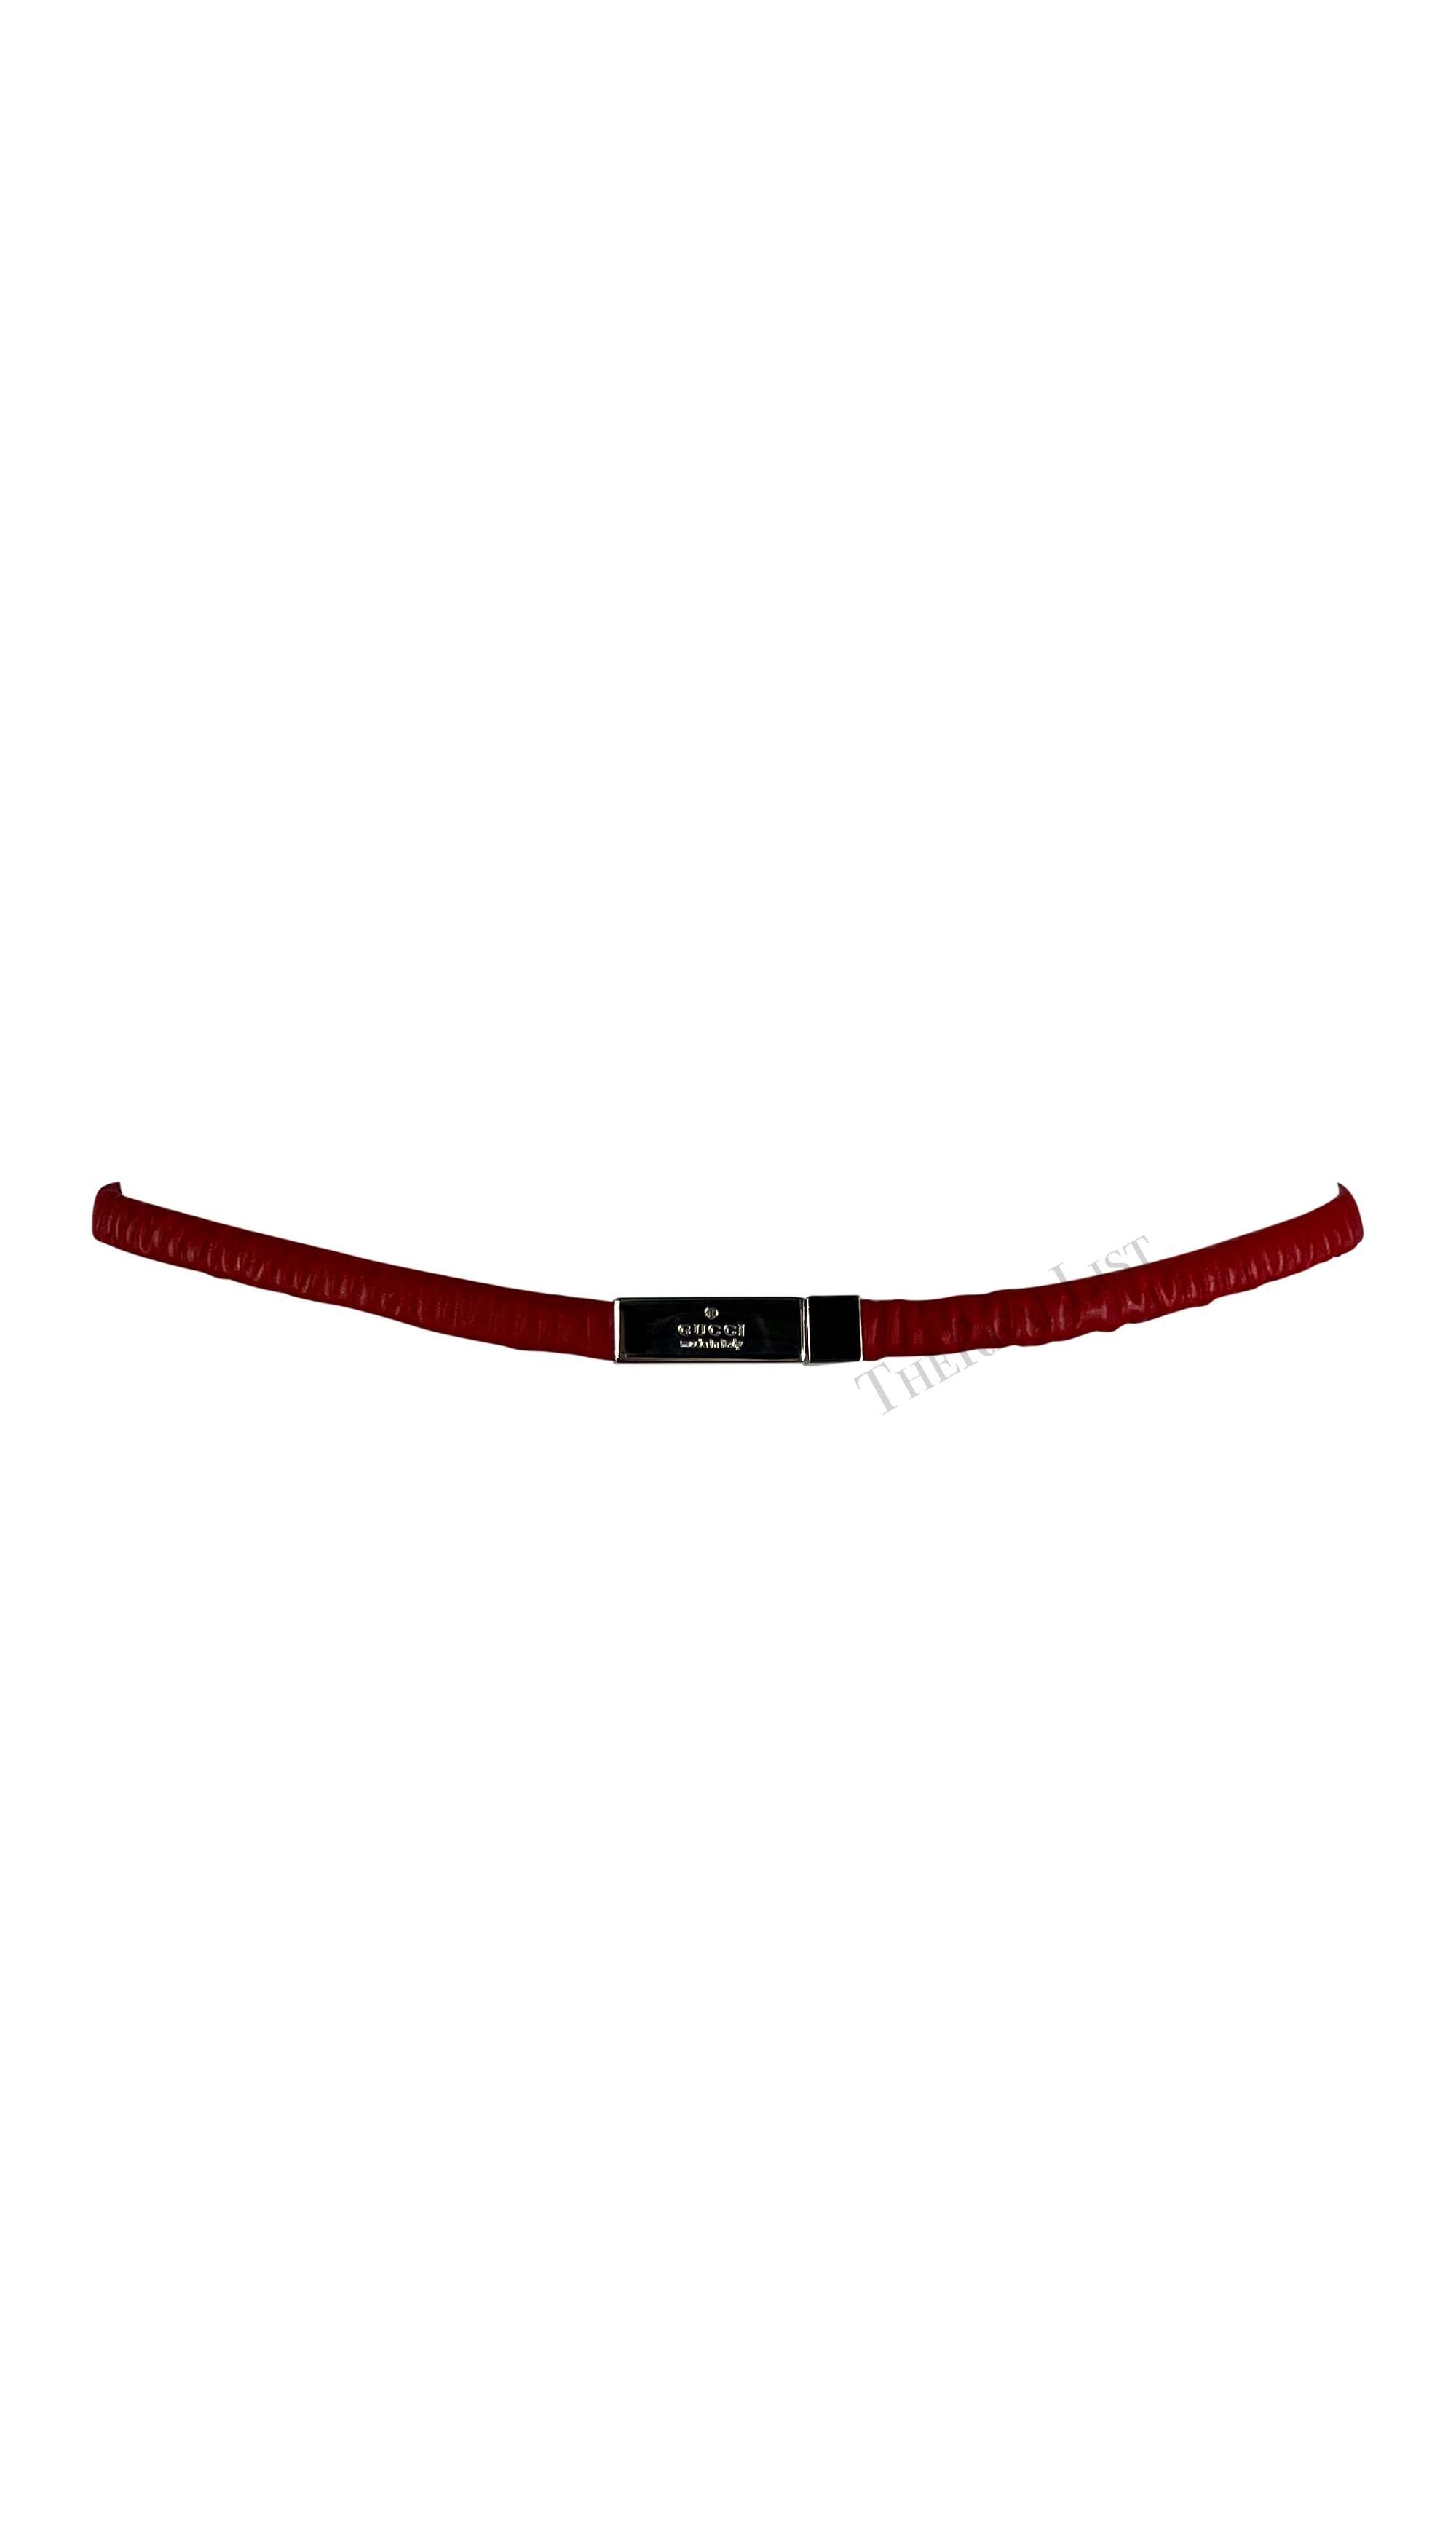 S/S 1999 Gucci by Tom Ford Runway Elasticized Red Leather Logo Thin Belt For Sale 8